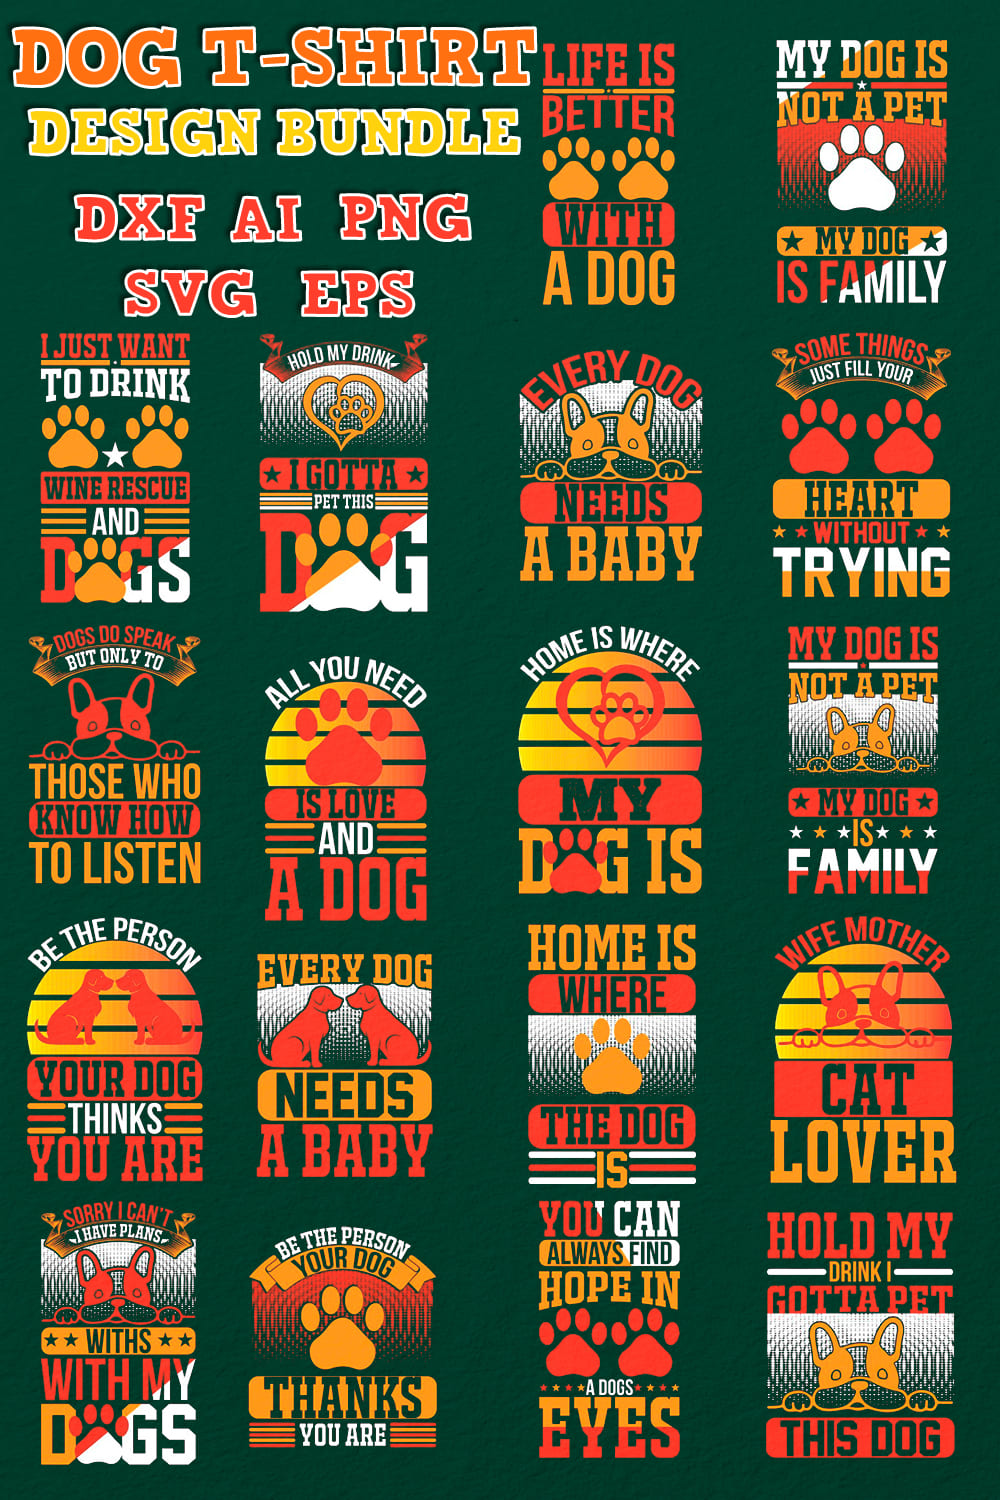 Set of colorful images about love for dogs.